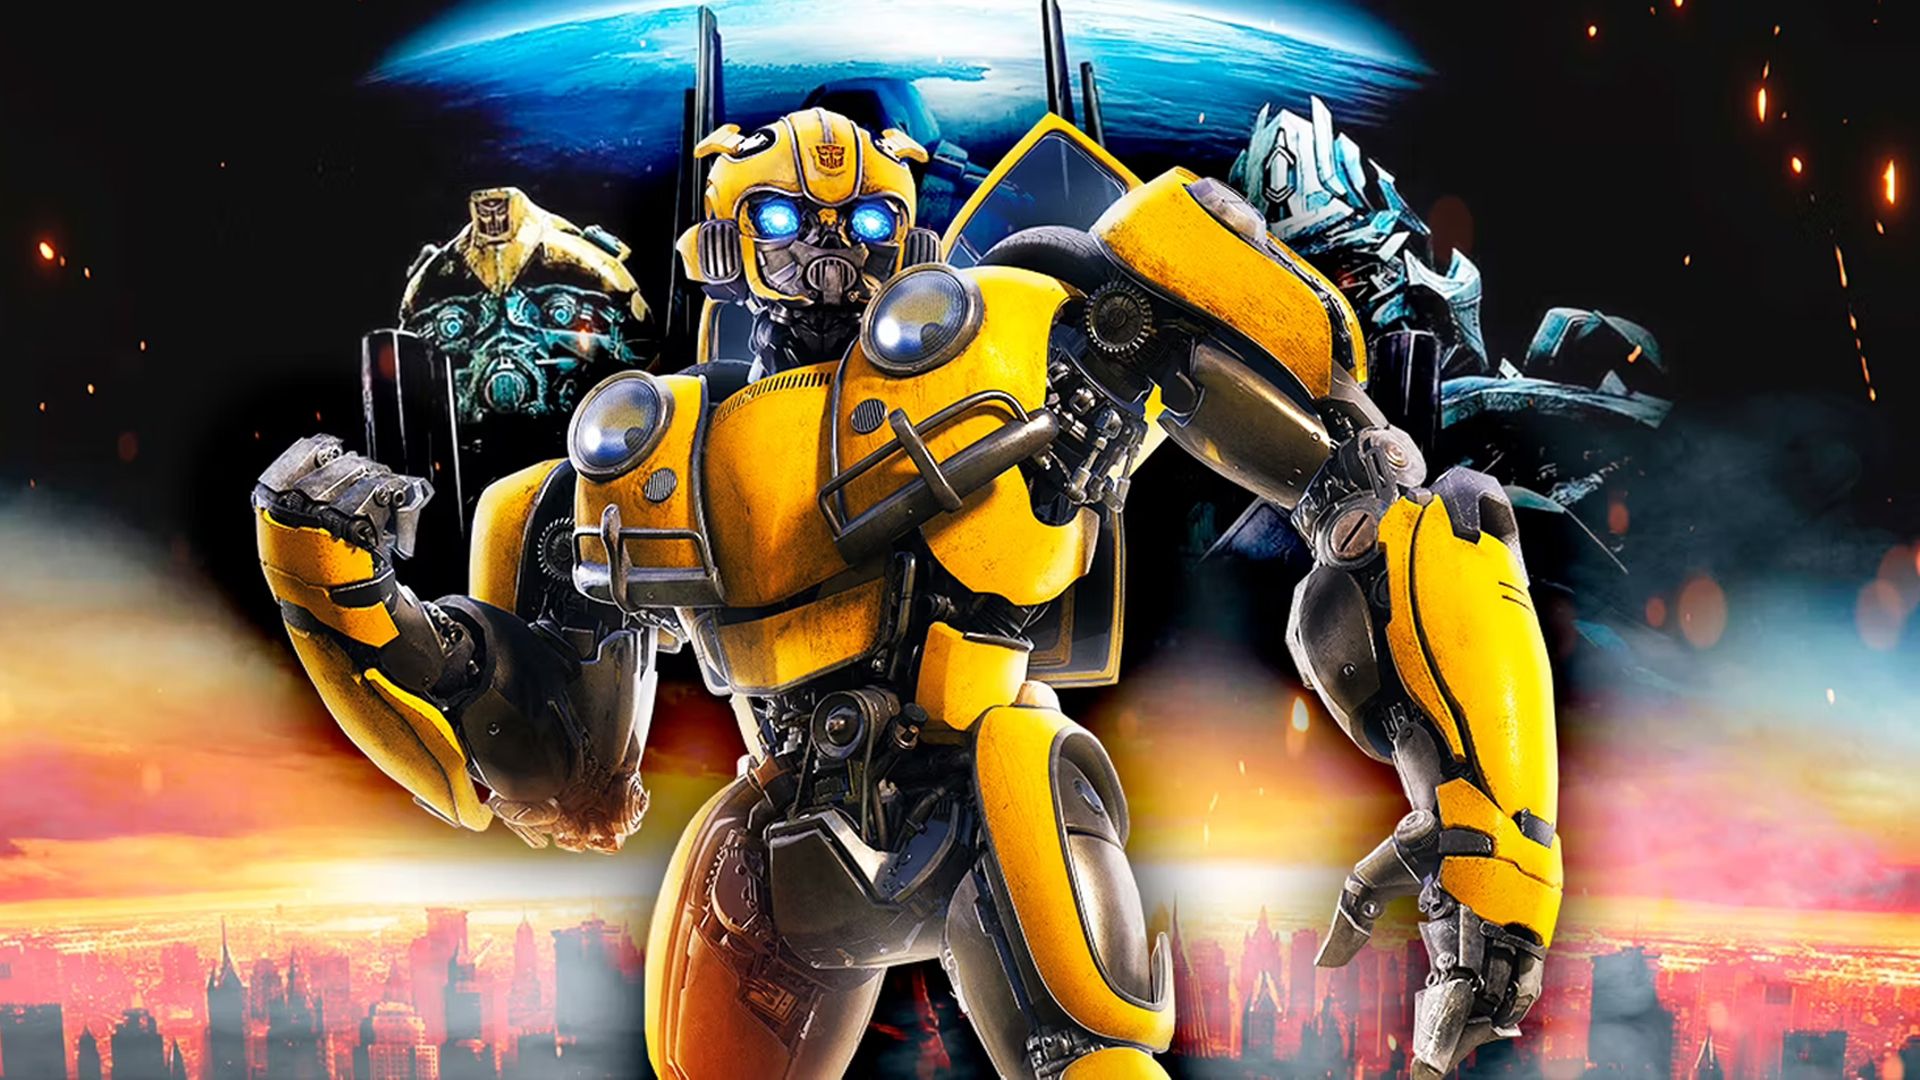 Is Michael Bay's Transformers Connected to Bumblebee? EMAKI